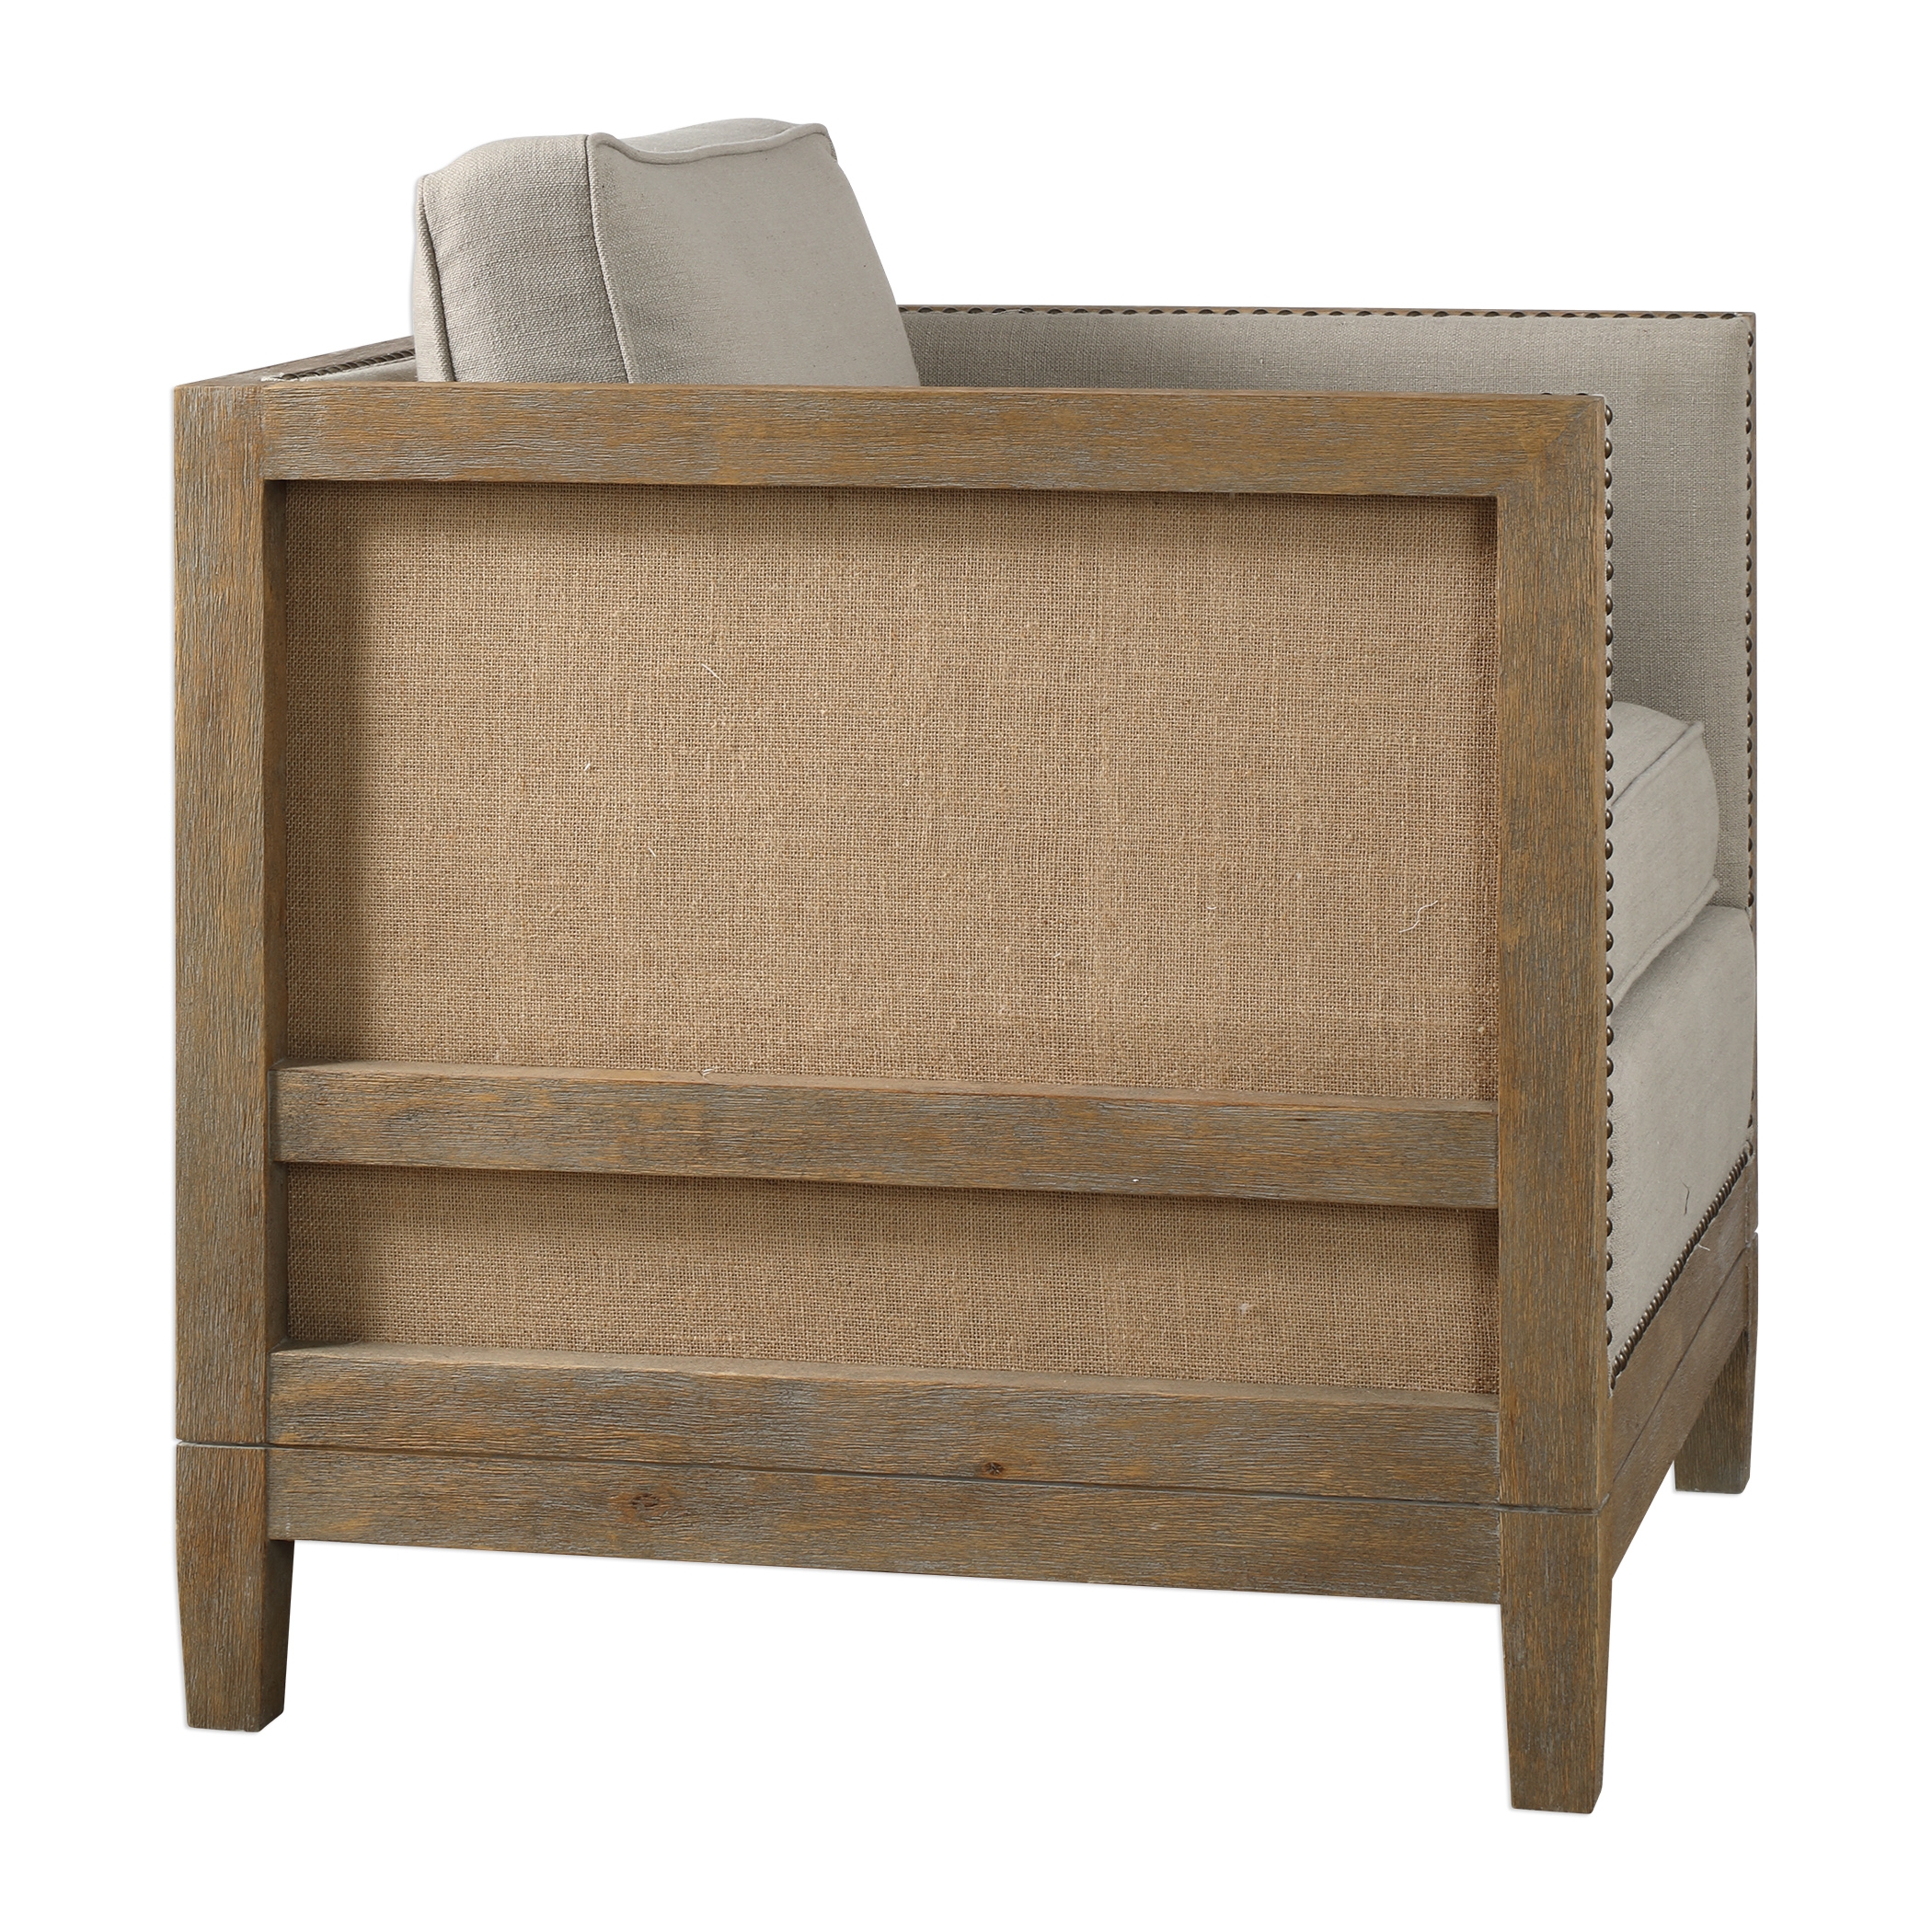 Kyle Weathered Oak Accent Chair - Image 8